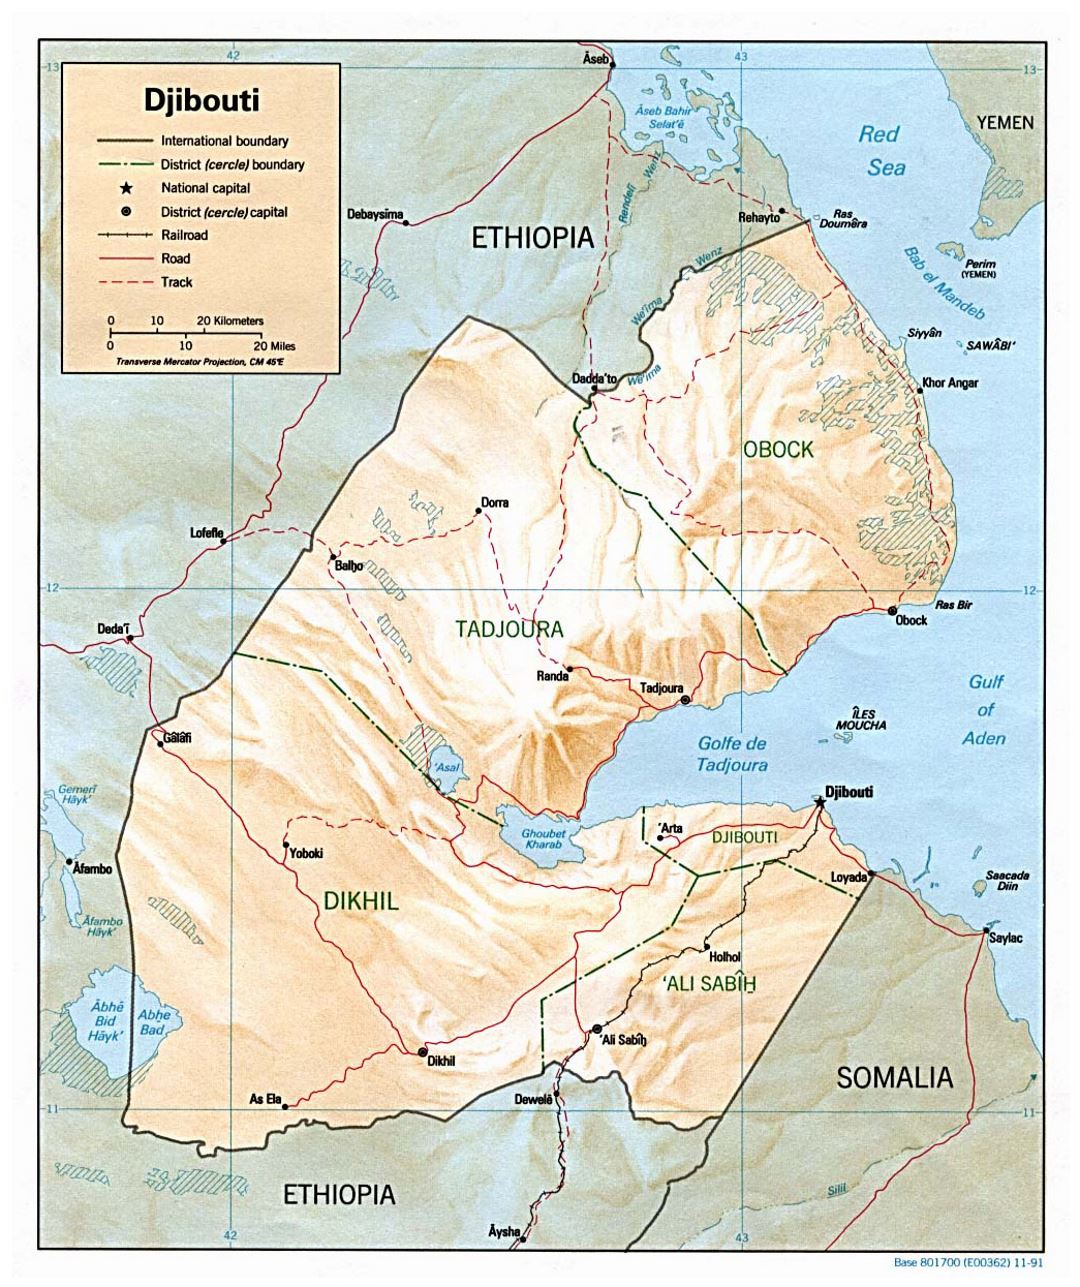 Detailed political and administrative map of Djibouti with relief, roads, railroads and major cities - 1991